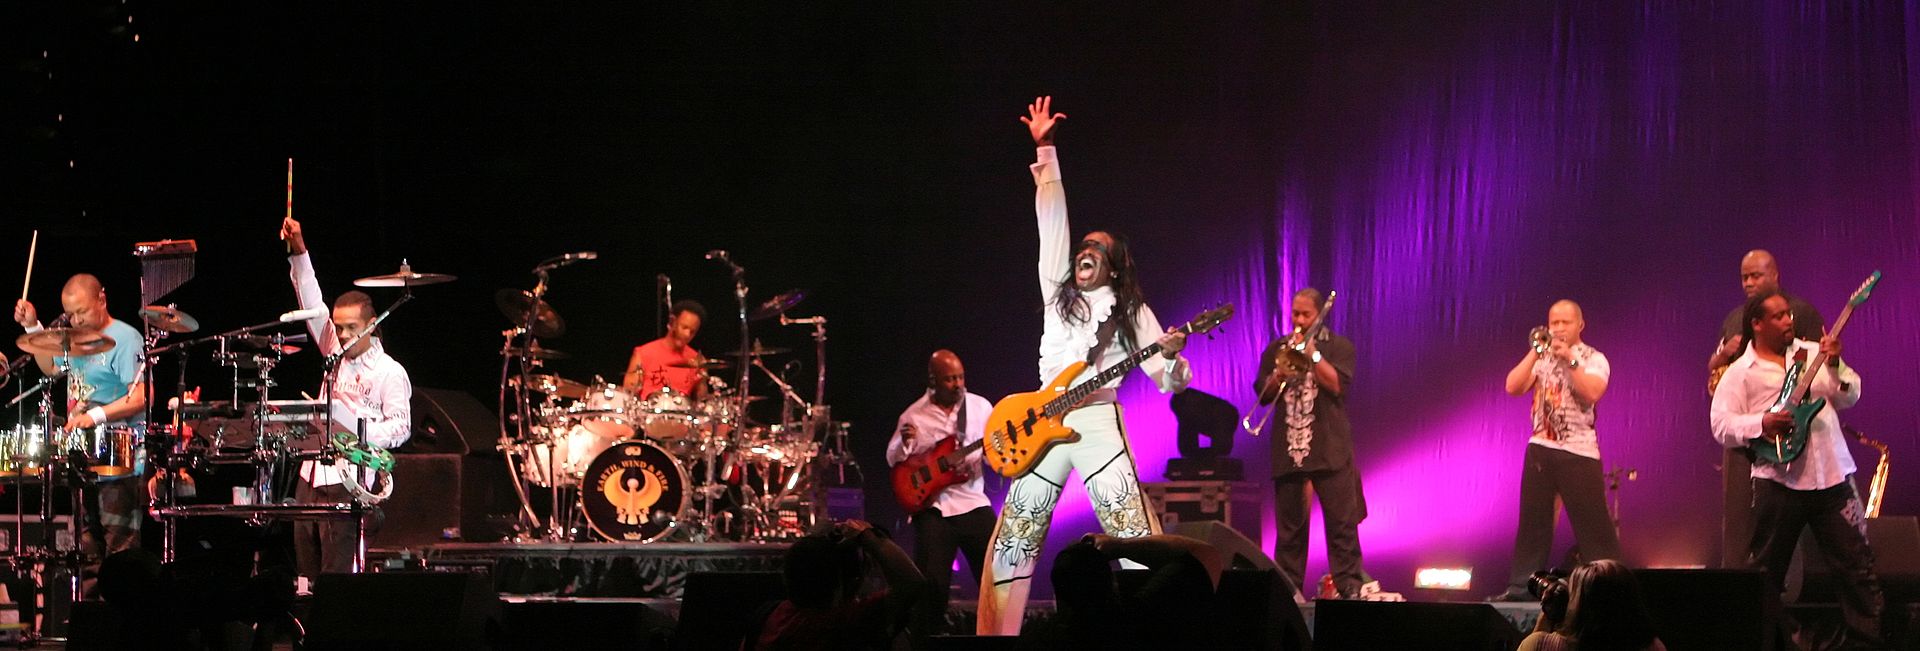 Earth, Wind and Fire Performing in 2009